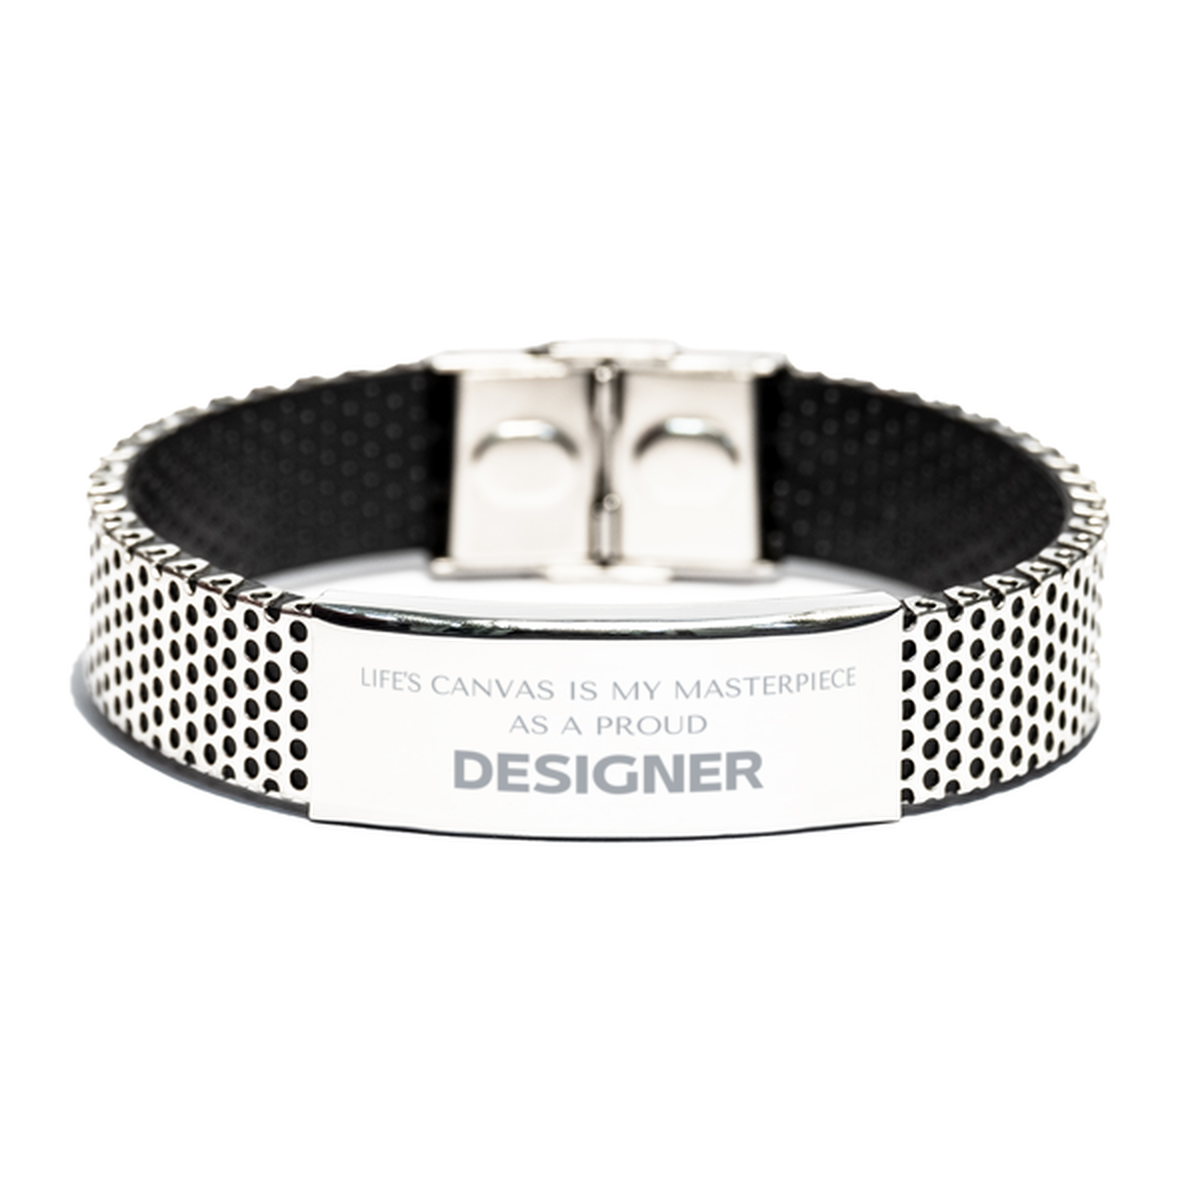 Proud Designer Gifts, Life's canvas is my masterpiece, Epic Birthday Christmas Unique Stainless Steel Bracelet For Designer, Coworkers, Men, Women, Friends